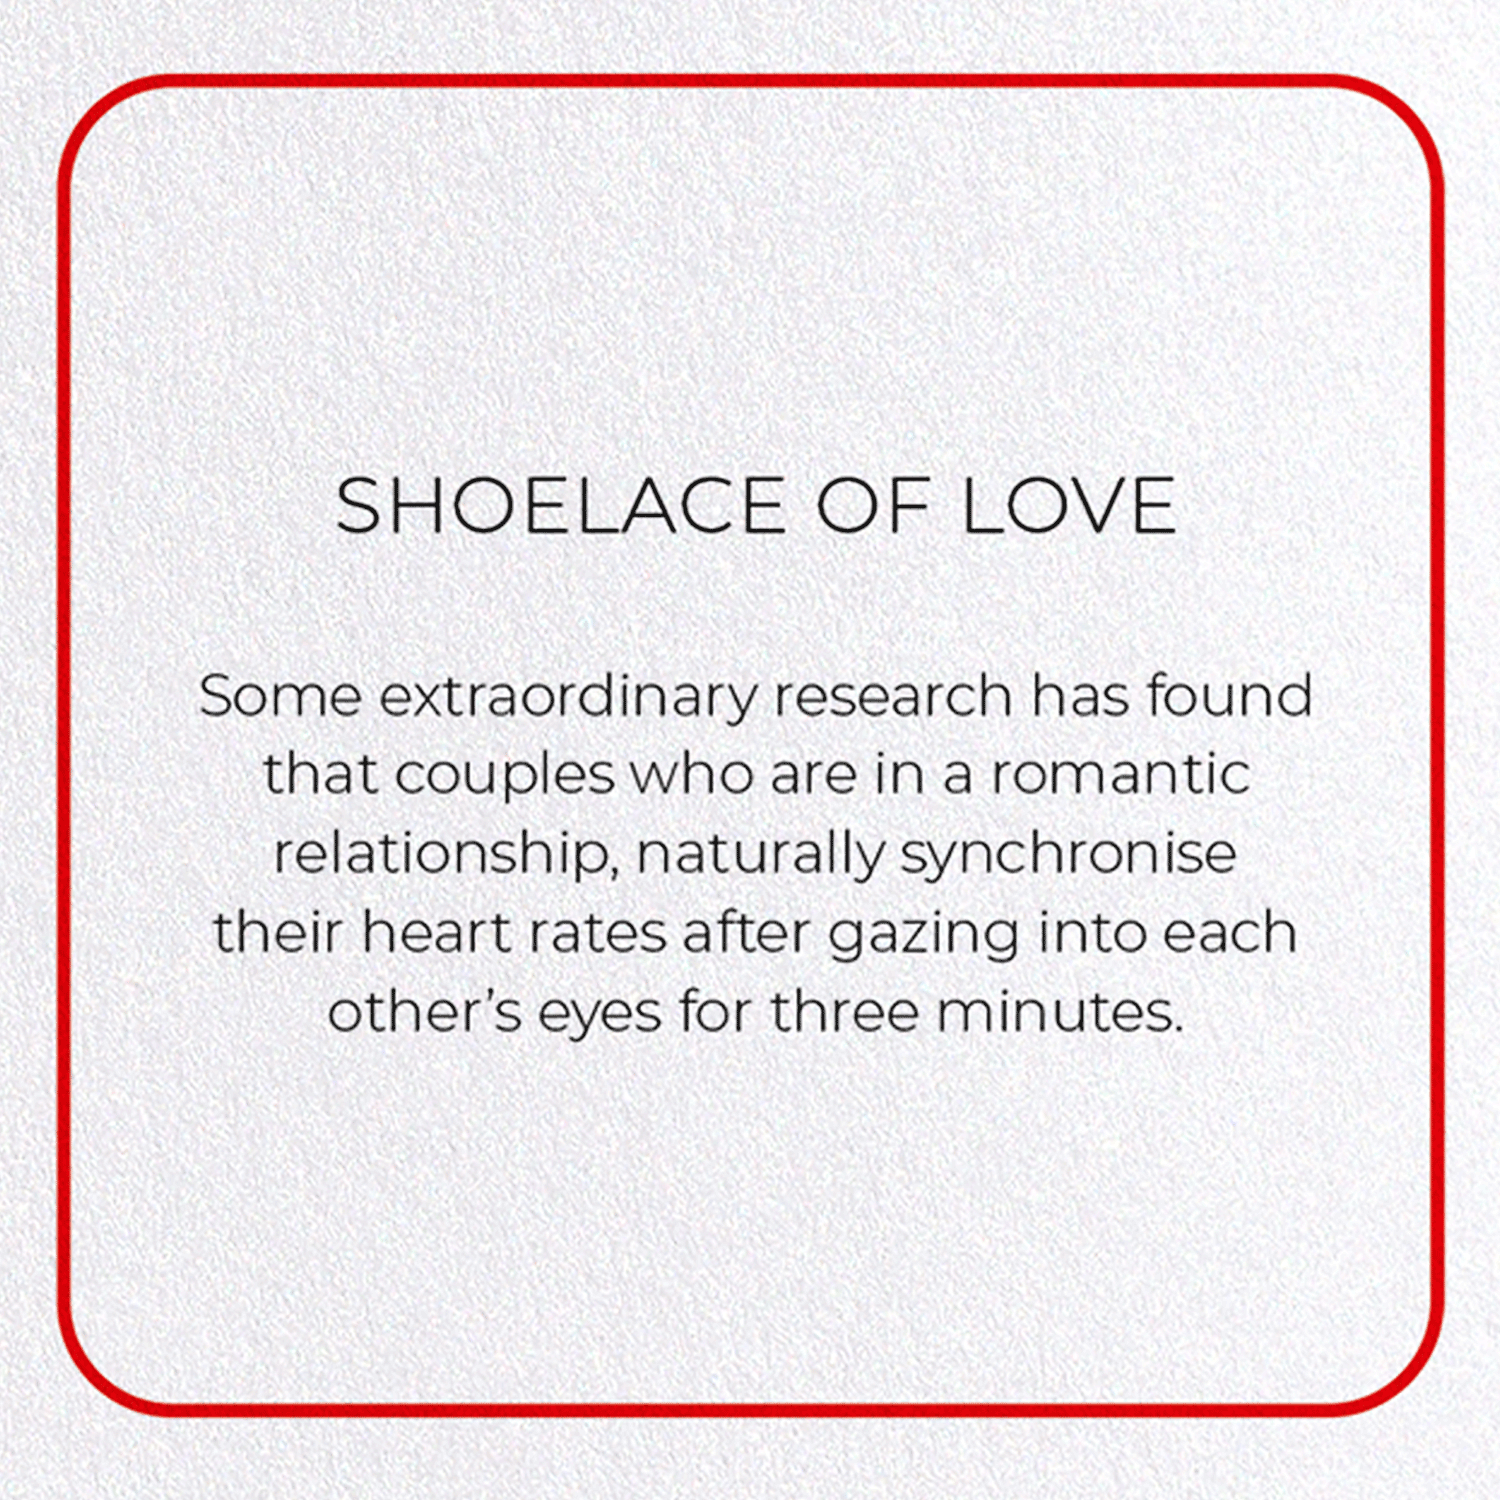 SHOELACE OF LOVE: Photo Greeting Card